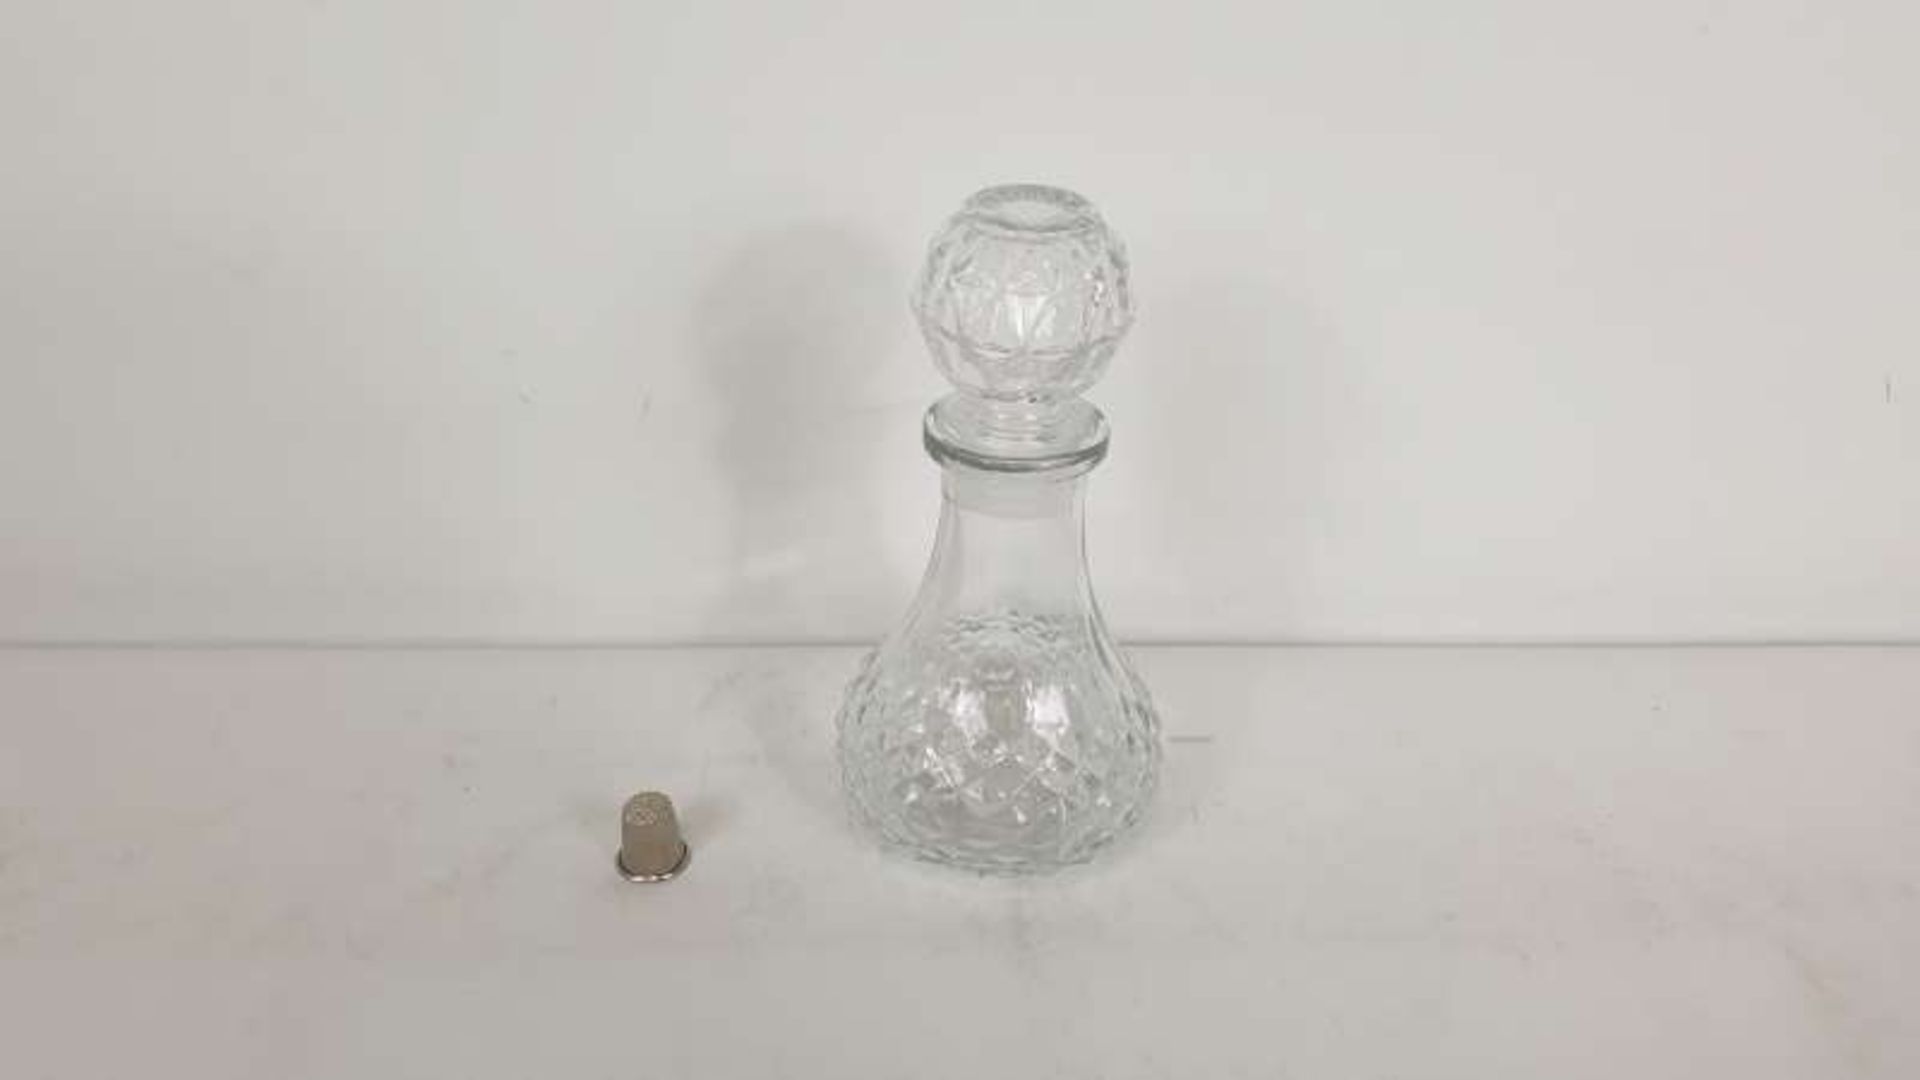 360 X DECORATIVE DECANTERS IN 15 BOXES